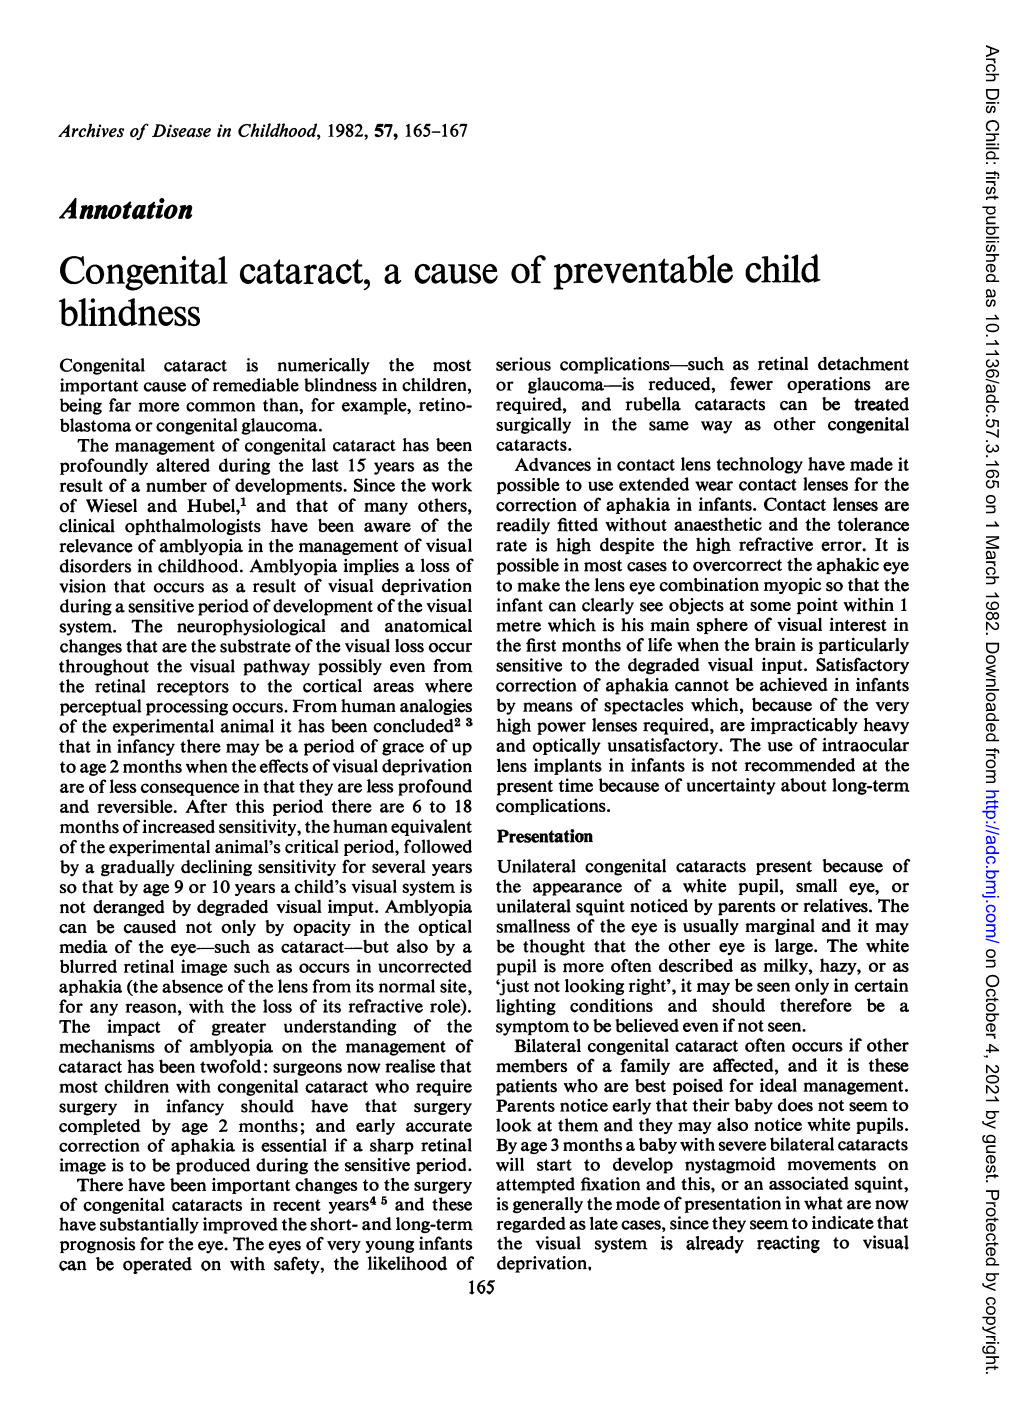 Congenital Cataract, a Cause of Preventable Child Blindness